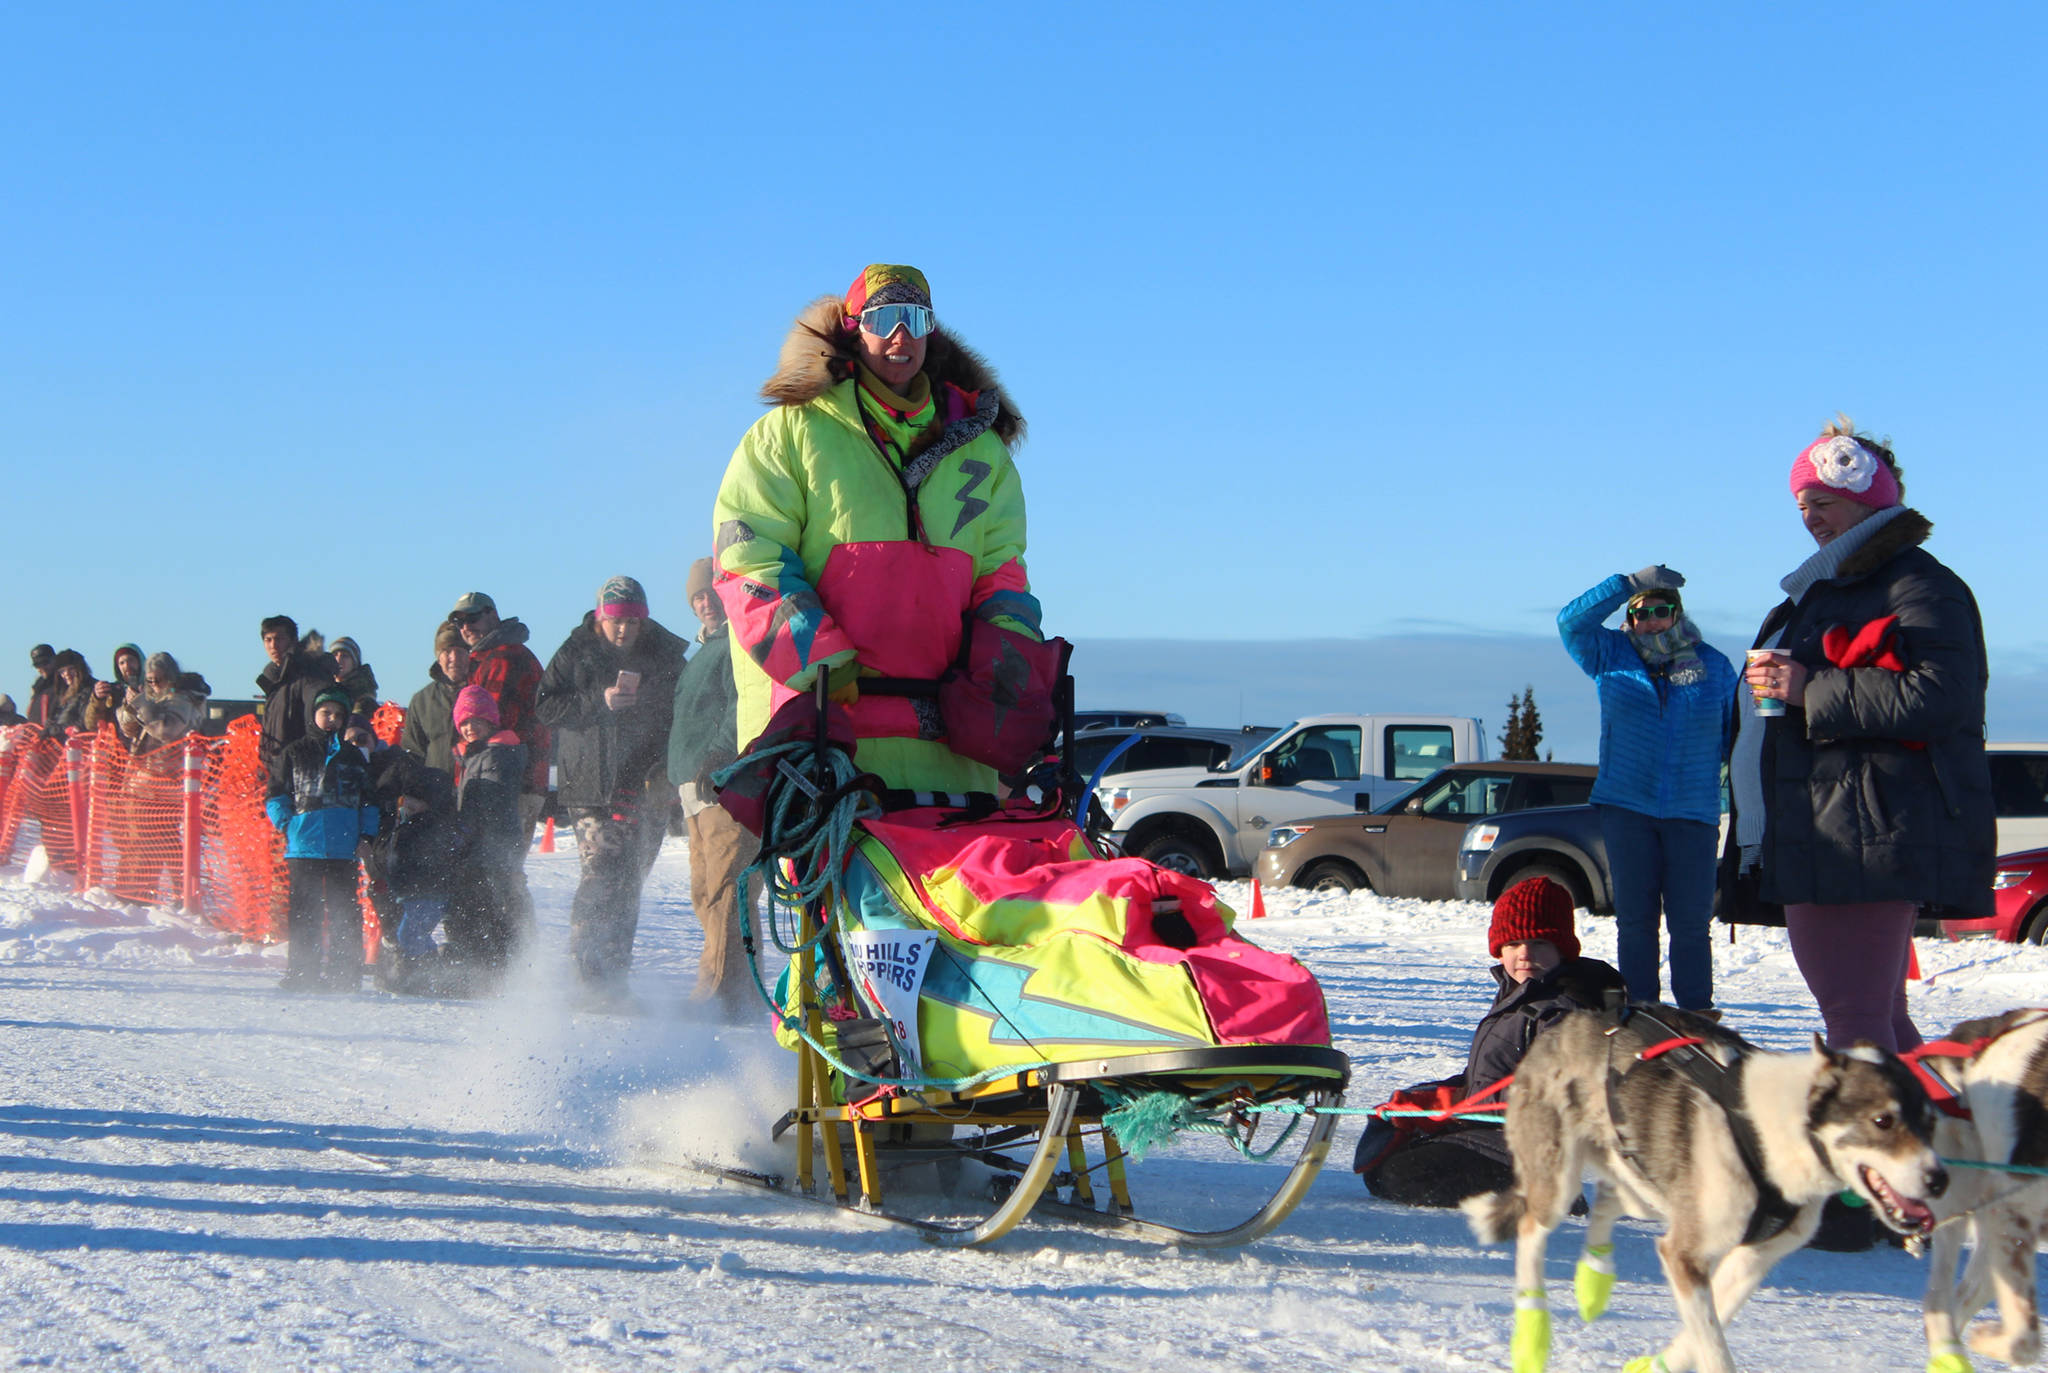 Monica Zappa, in her telltale neon garb, takes off with her team from the starting line of this year’s Tustumena 200 Sled Dog Race on Saturday, Jan. 27, 2018 at Freddie’s Roadhouse in Ninilchik, Alaska. (Homer News file photo)